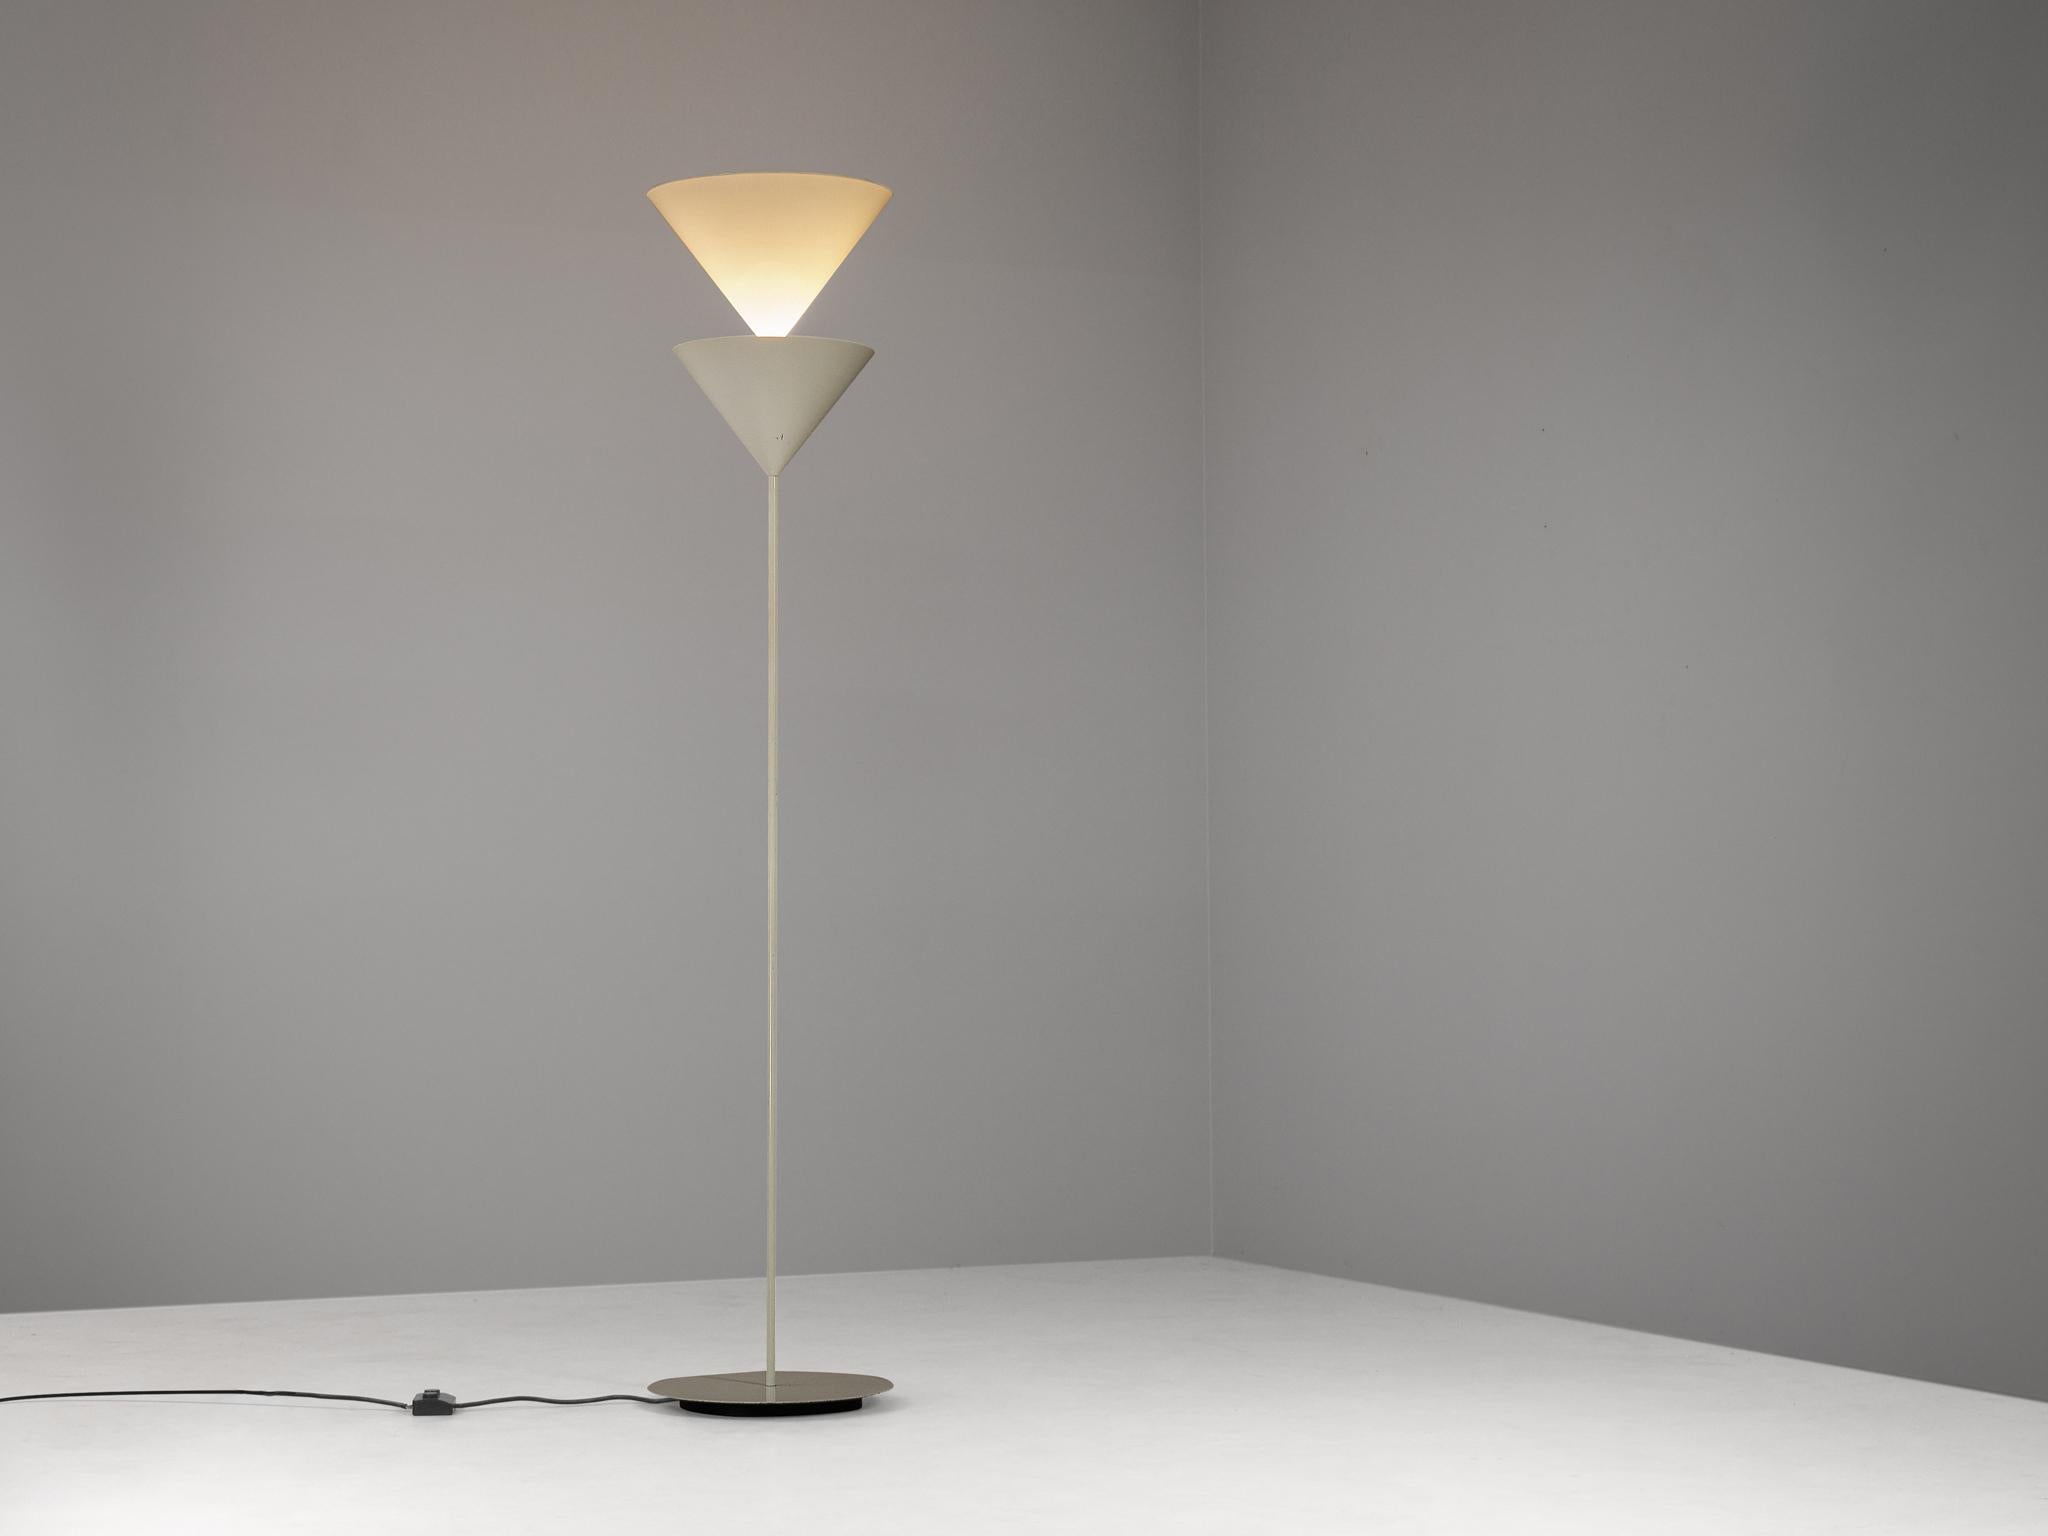 Vico Magistretti for O-Luce model 'Pascal' floor lamp, lacquered aluminum, Italy, 1979

A floor lamp designed by Vico Magistretti for O-Luce in 1979. This piece is very pure in its form and design, being sober and lacking any finery. The piece is